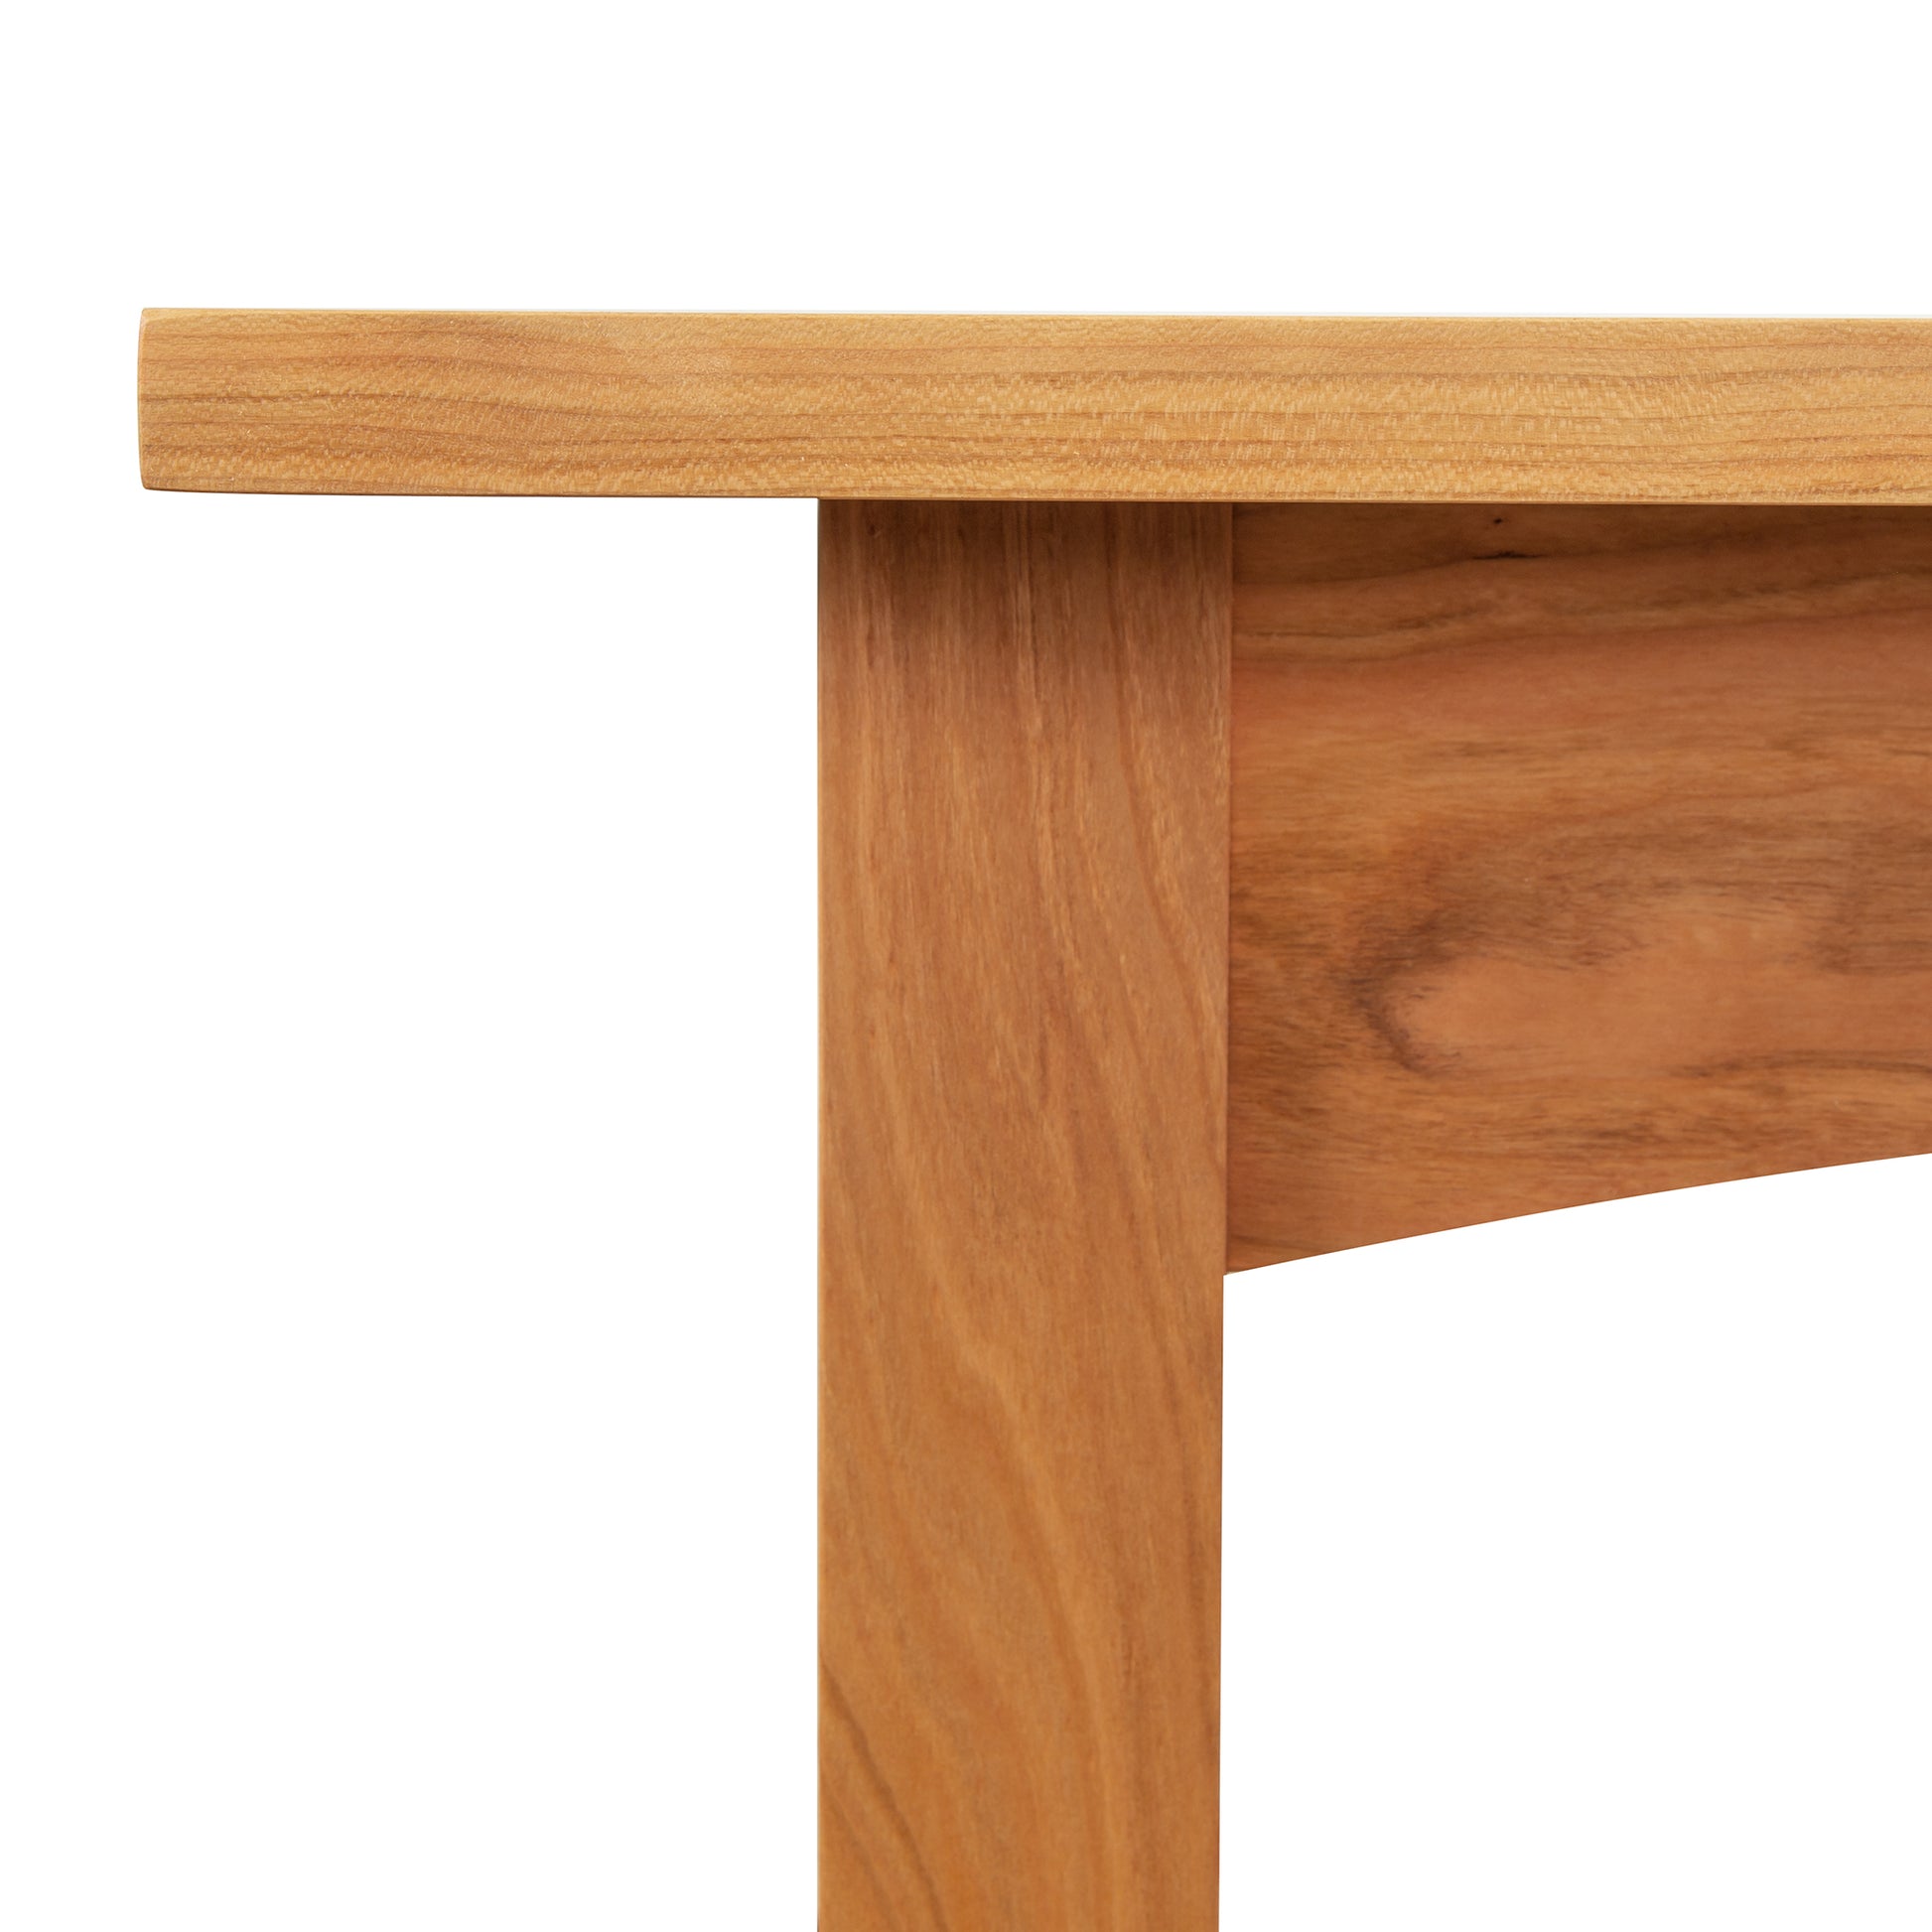 Close-up view of a Vermont Furniture Designs Burlington Shaker Lamp Table wooden table corner showing joint and grain details.